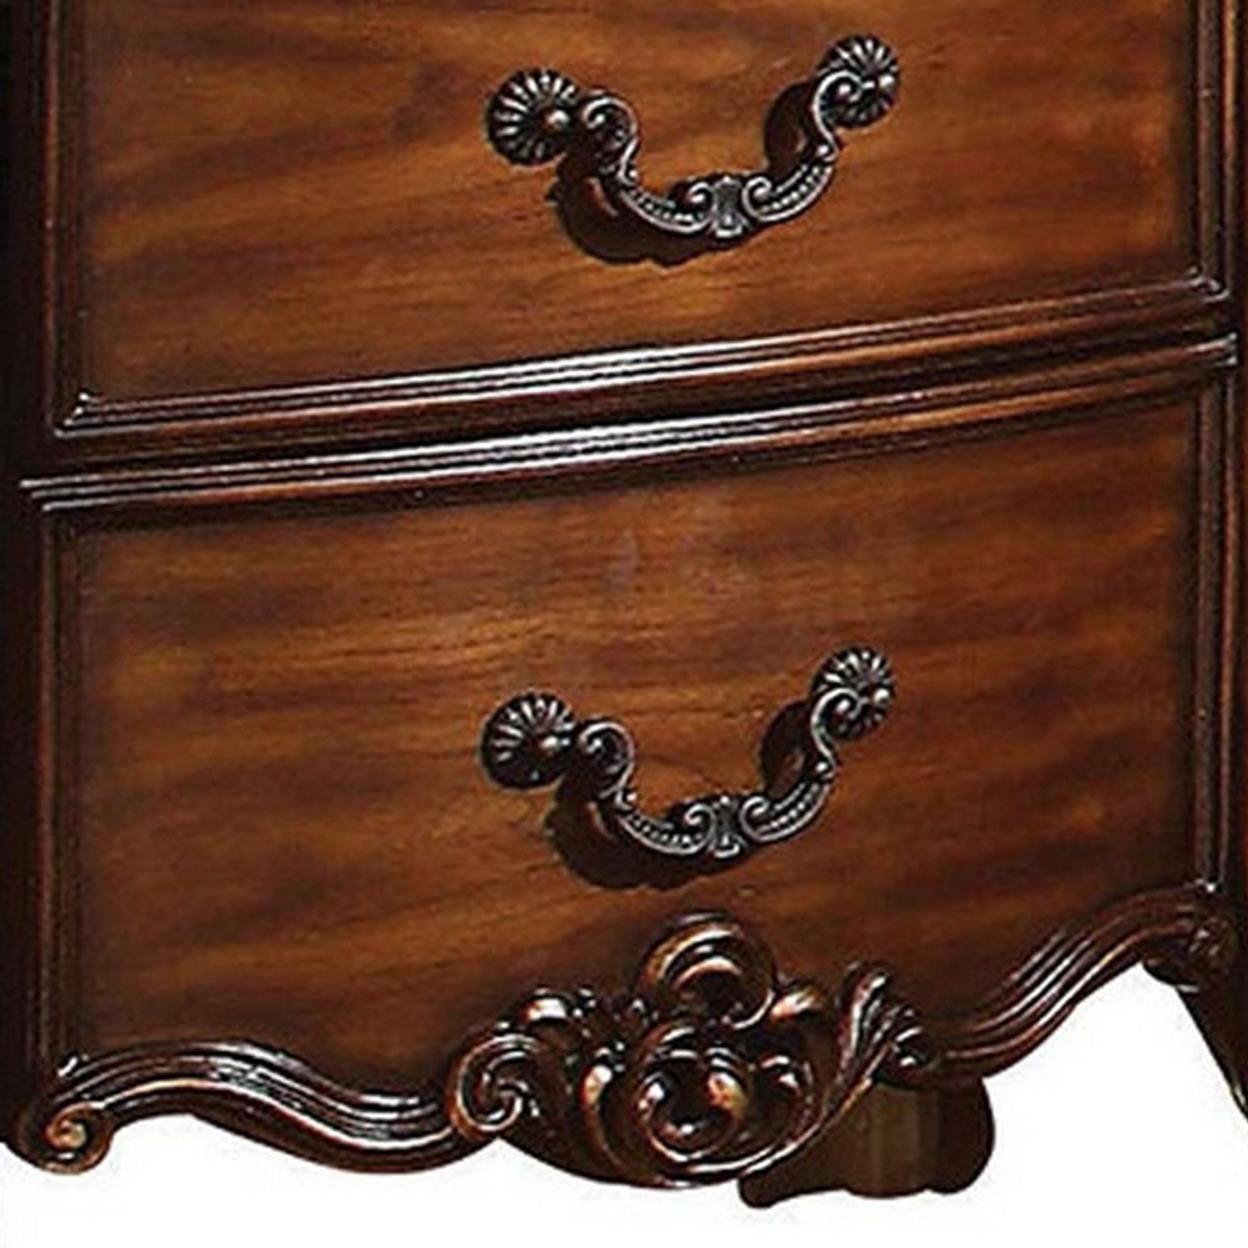 Traditional Style Wooden Nightstand With Two Drawers, Cherry Brown- Saltoro Sherpi